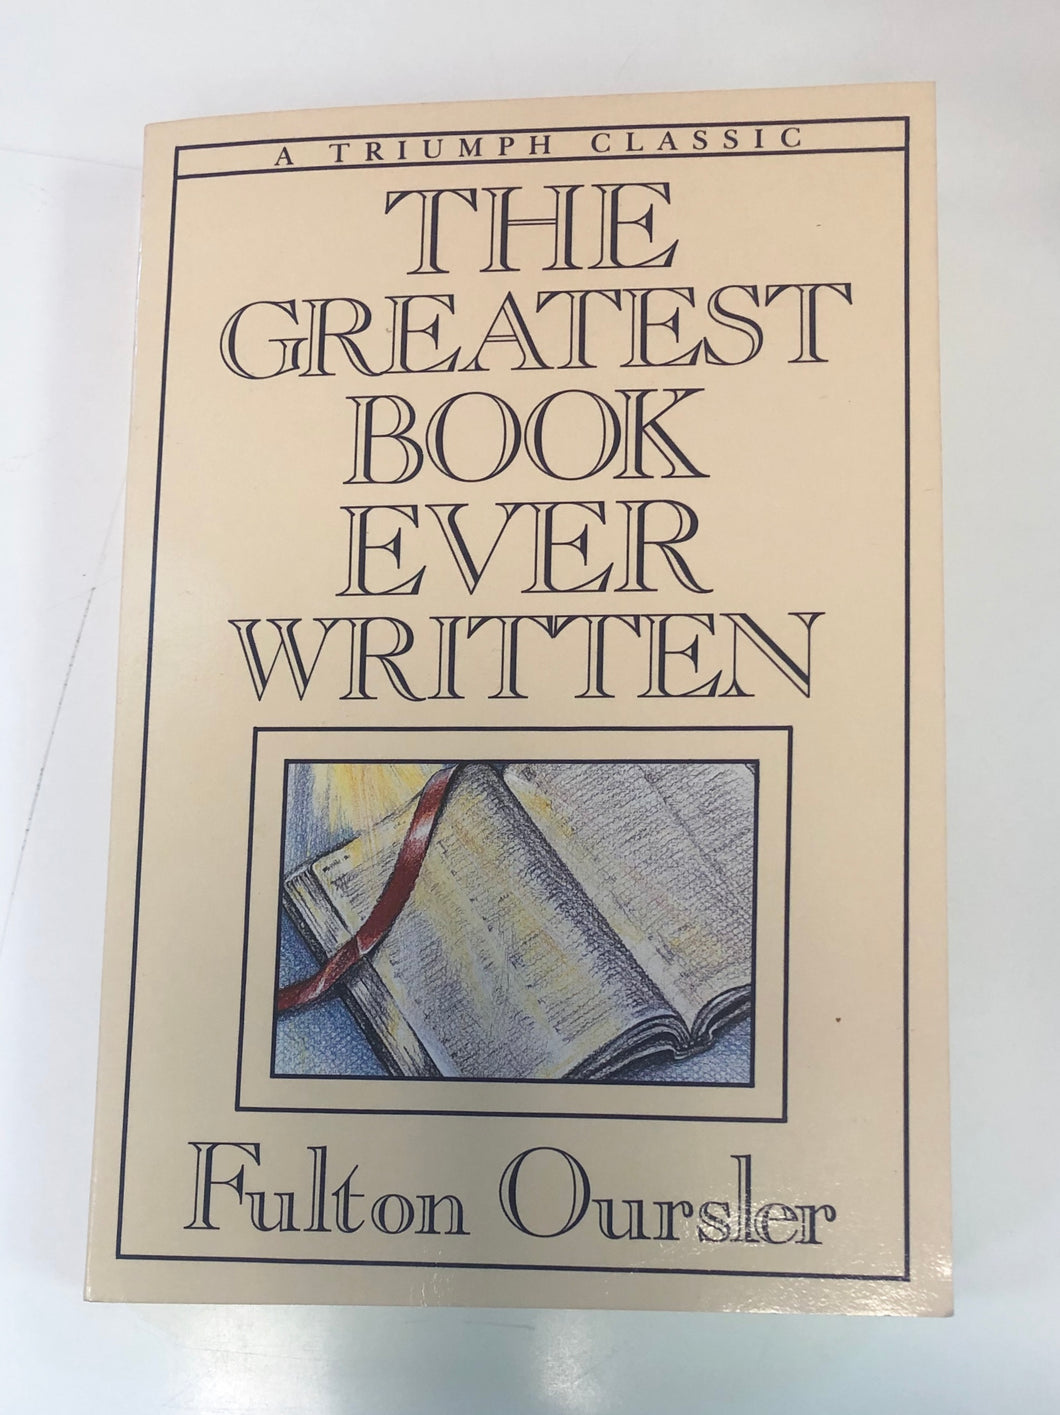 The Greatest Book Ever Written by Fulton Oursler